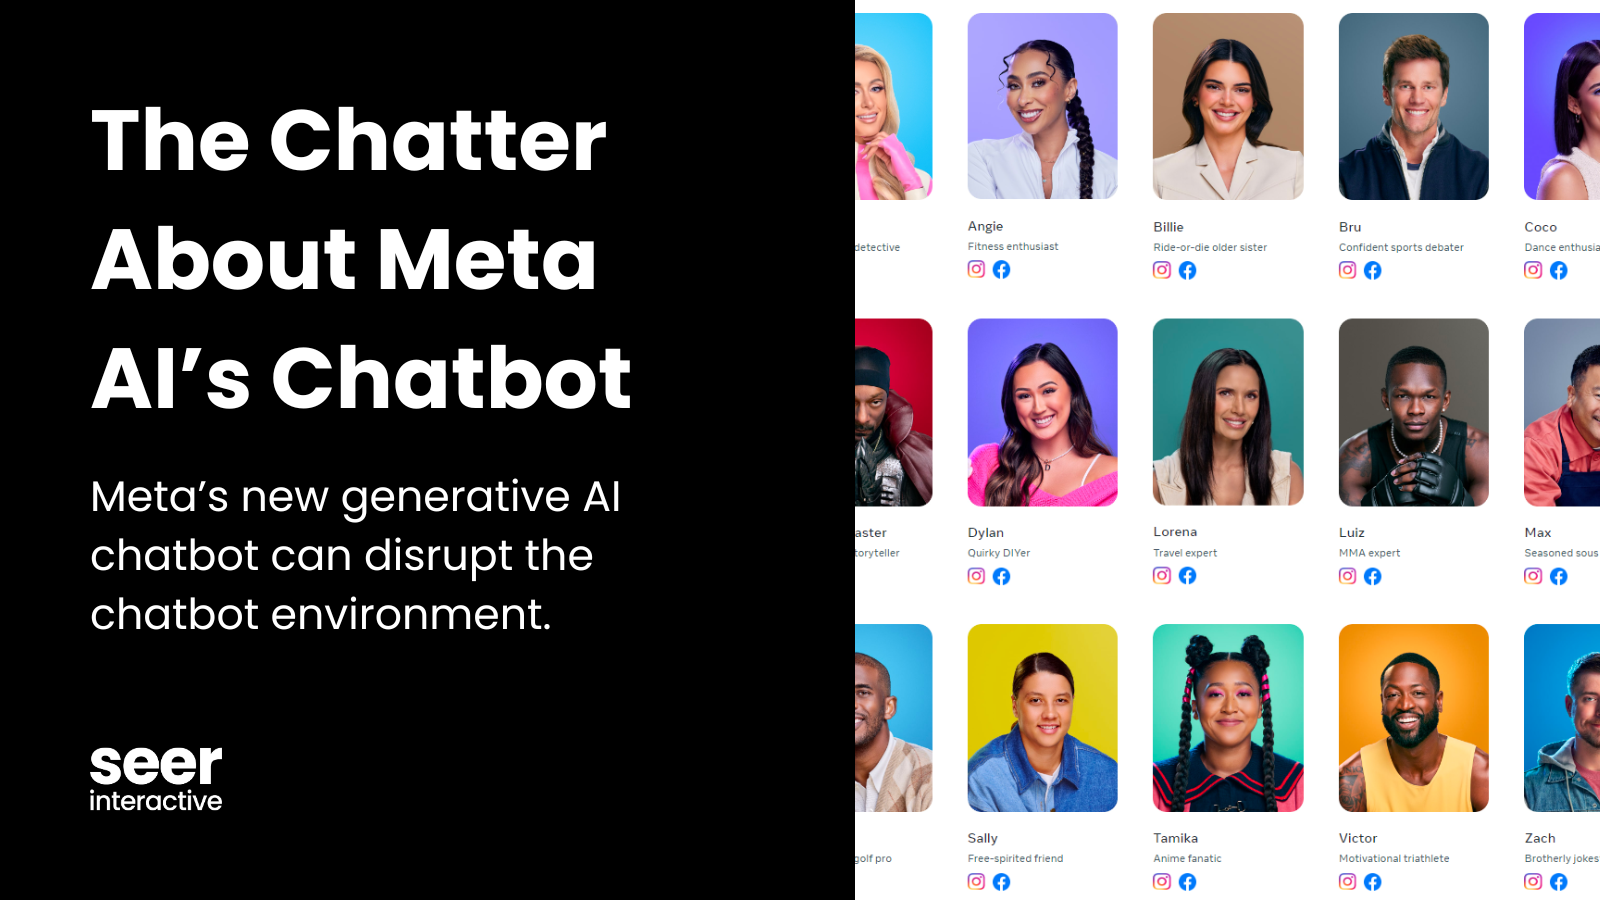 The Chatter About Meta AI’s Chatbot